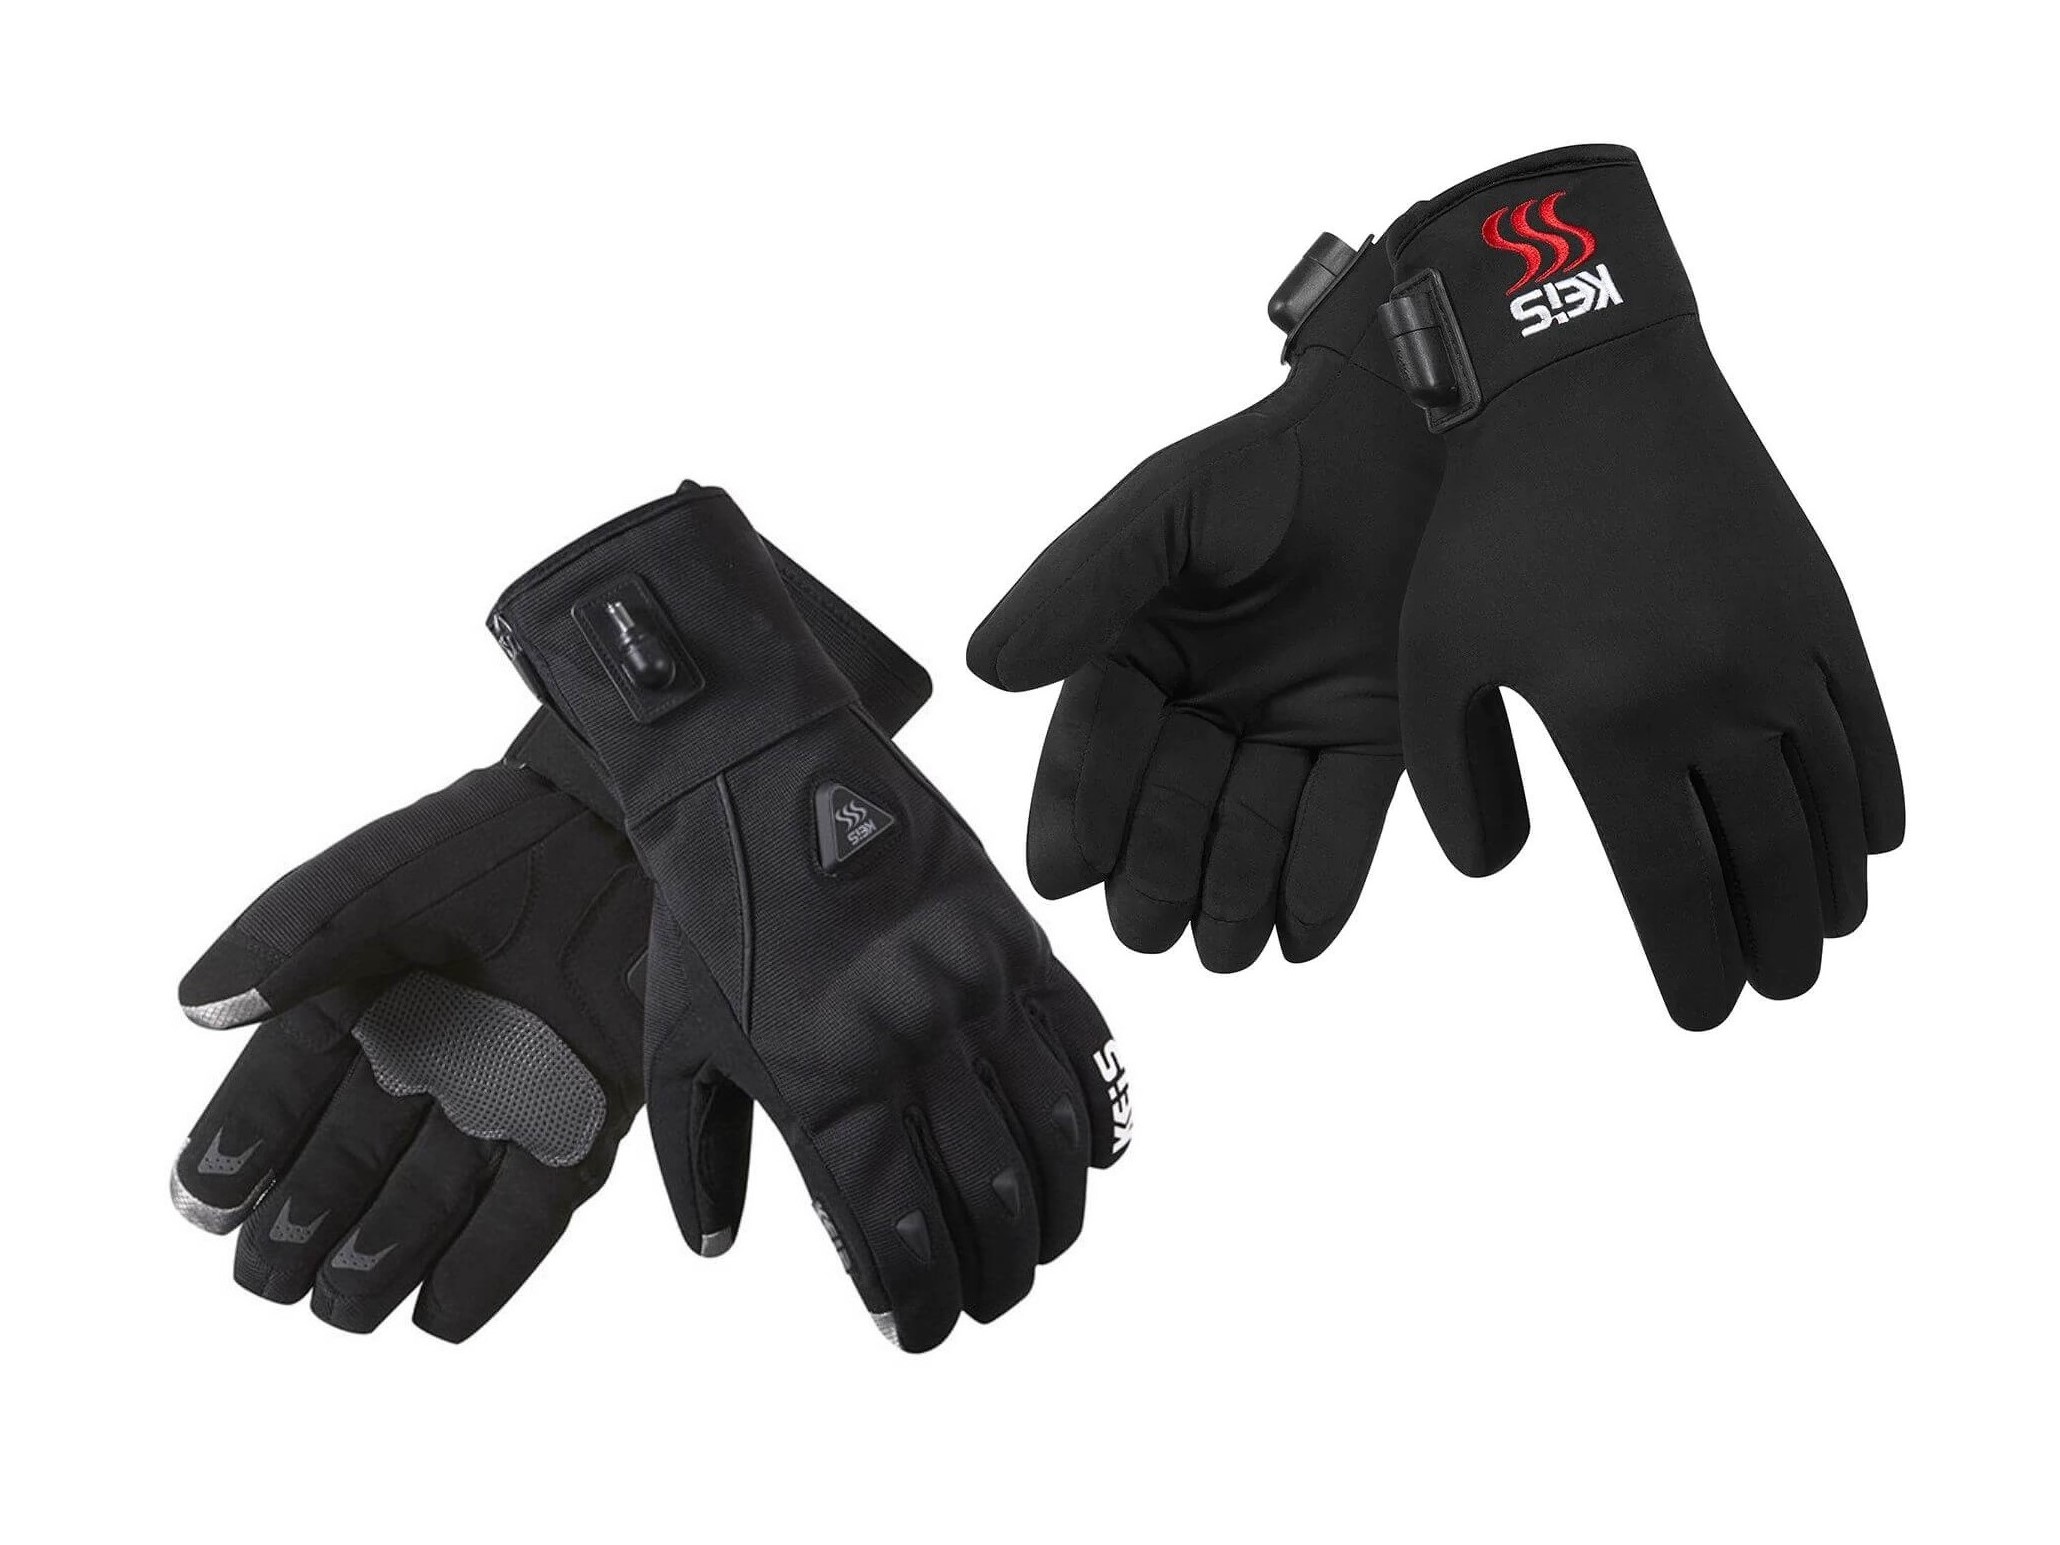 Heated Outer and Inner Gloves available at Laguna Motorcycles and Laguna Direct